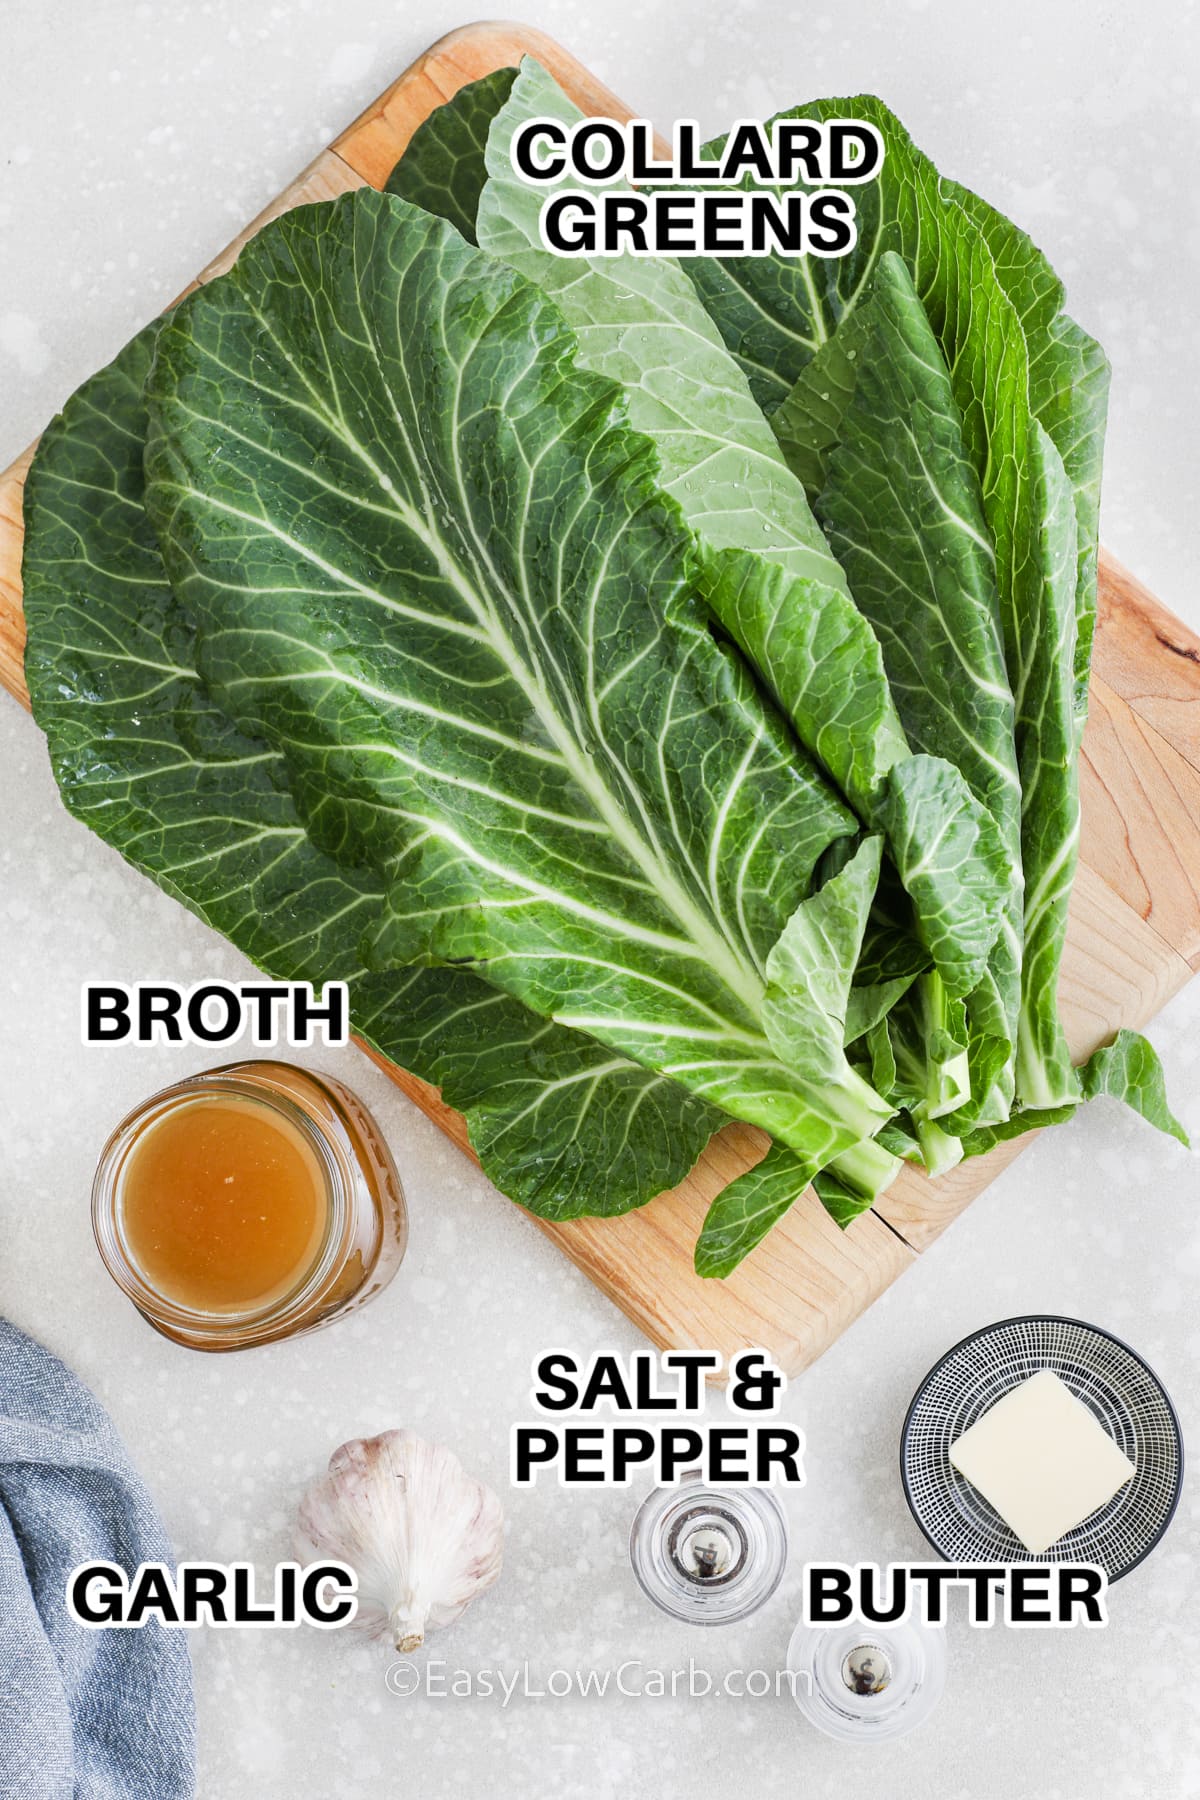 ingredients to make sauteed collard greens including collard greens, broth, salt, pepper, garlic, and butter